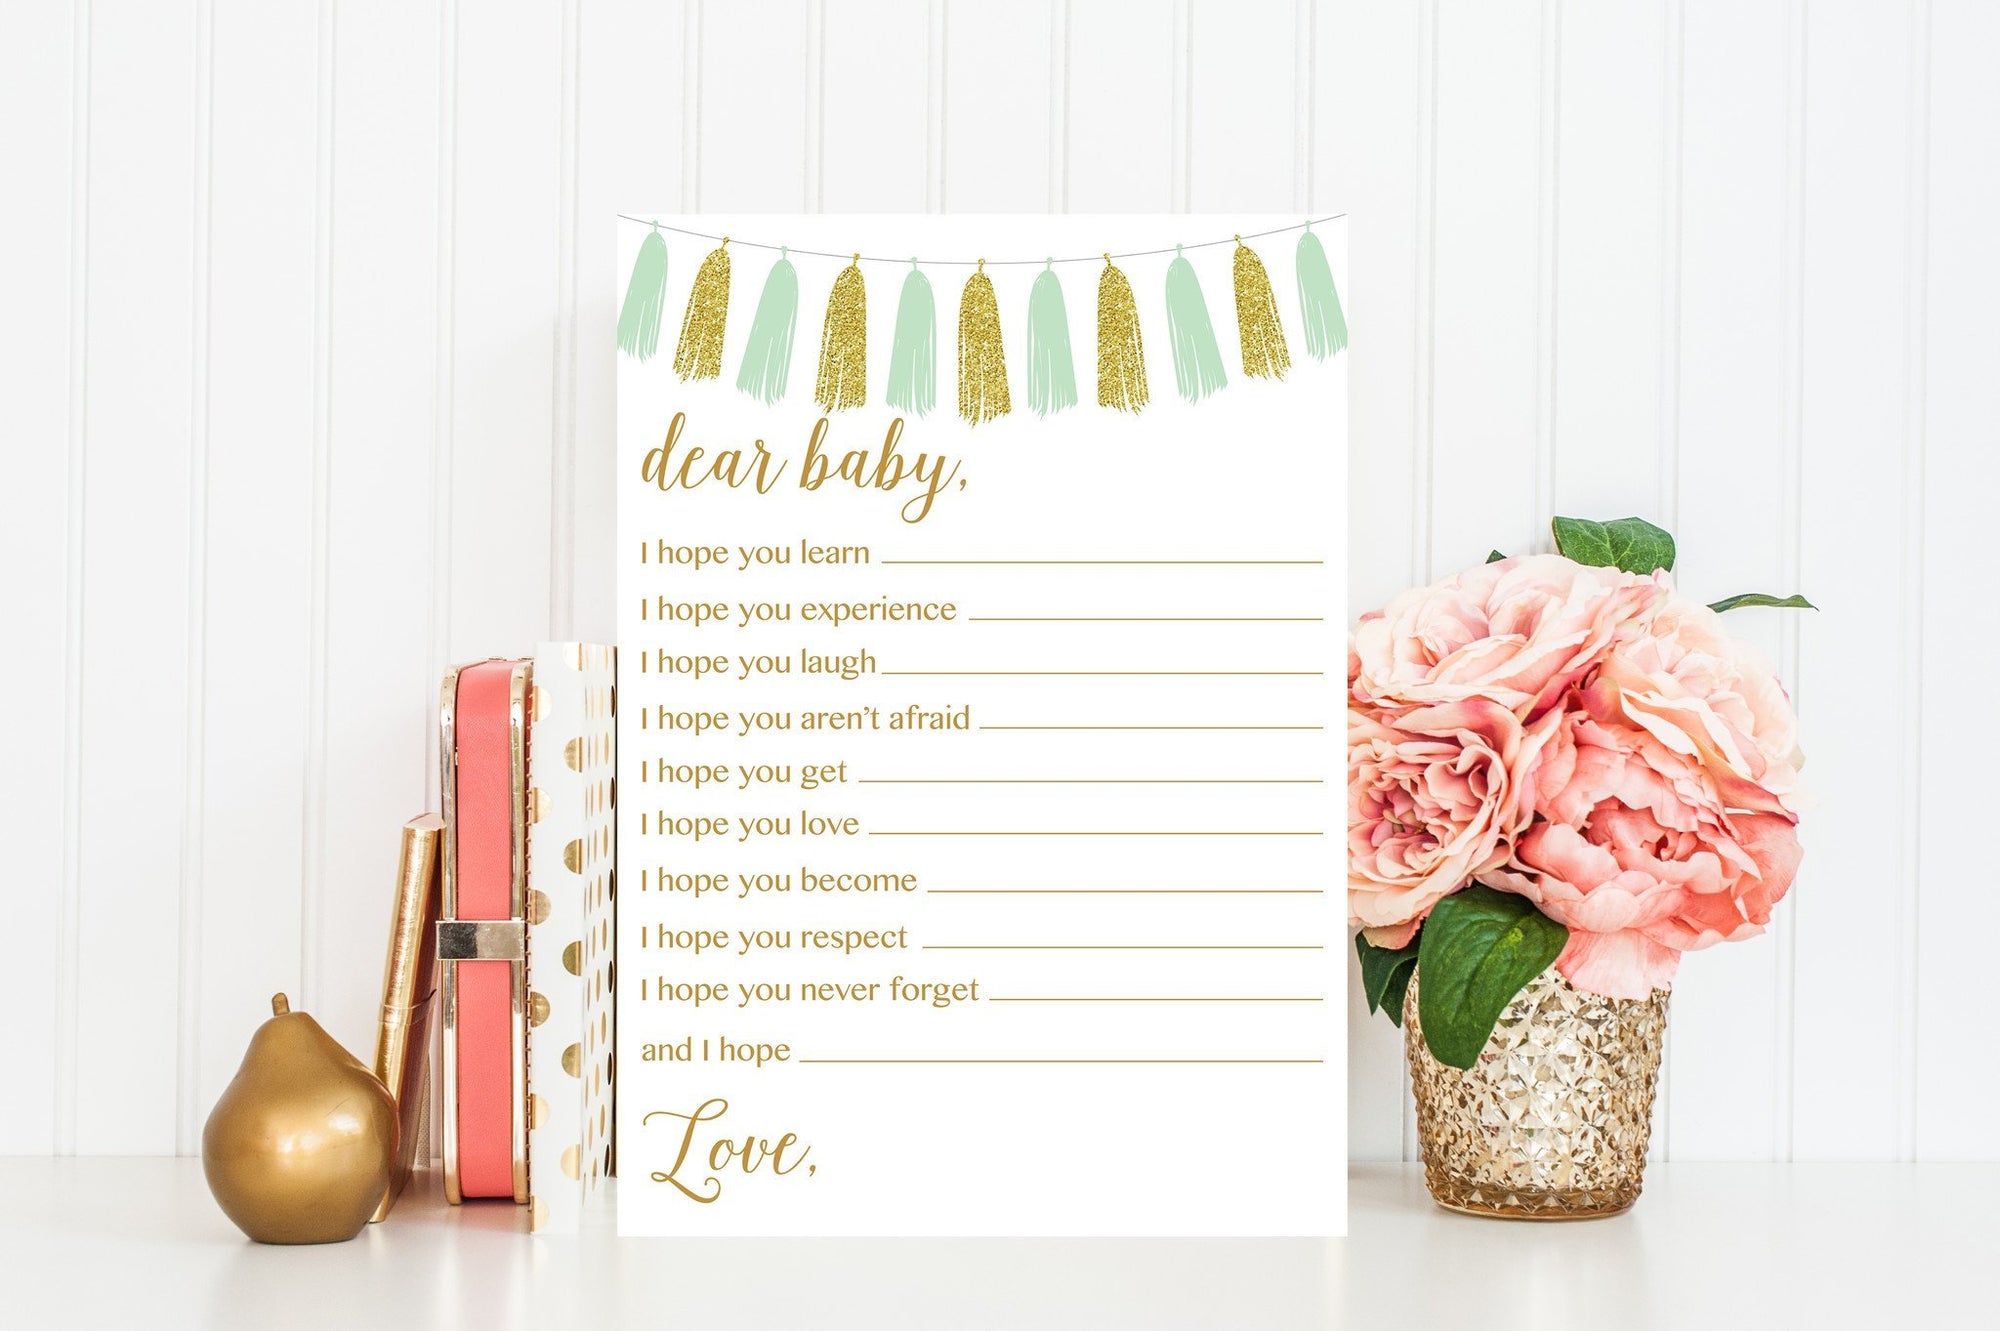 Dear Baby - Mint & Gold Tassel Printable - Pretty Collected